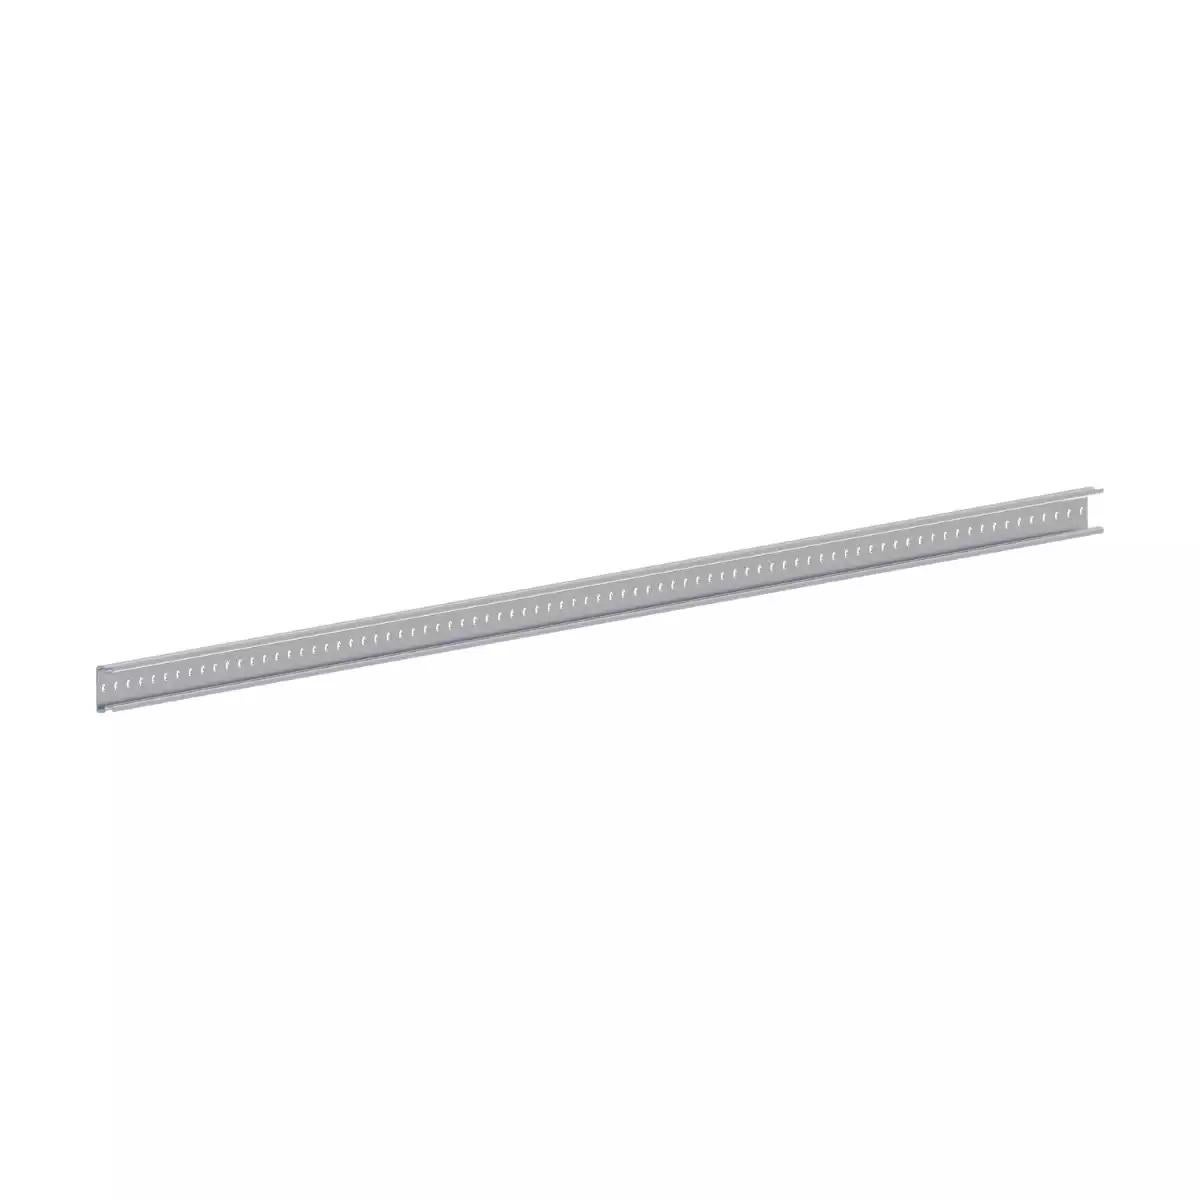 Spacial CRN One double-profile mounting rail perforated 35x15 L2000 Supply: 20